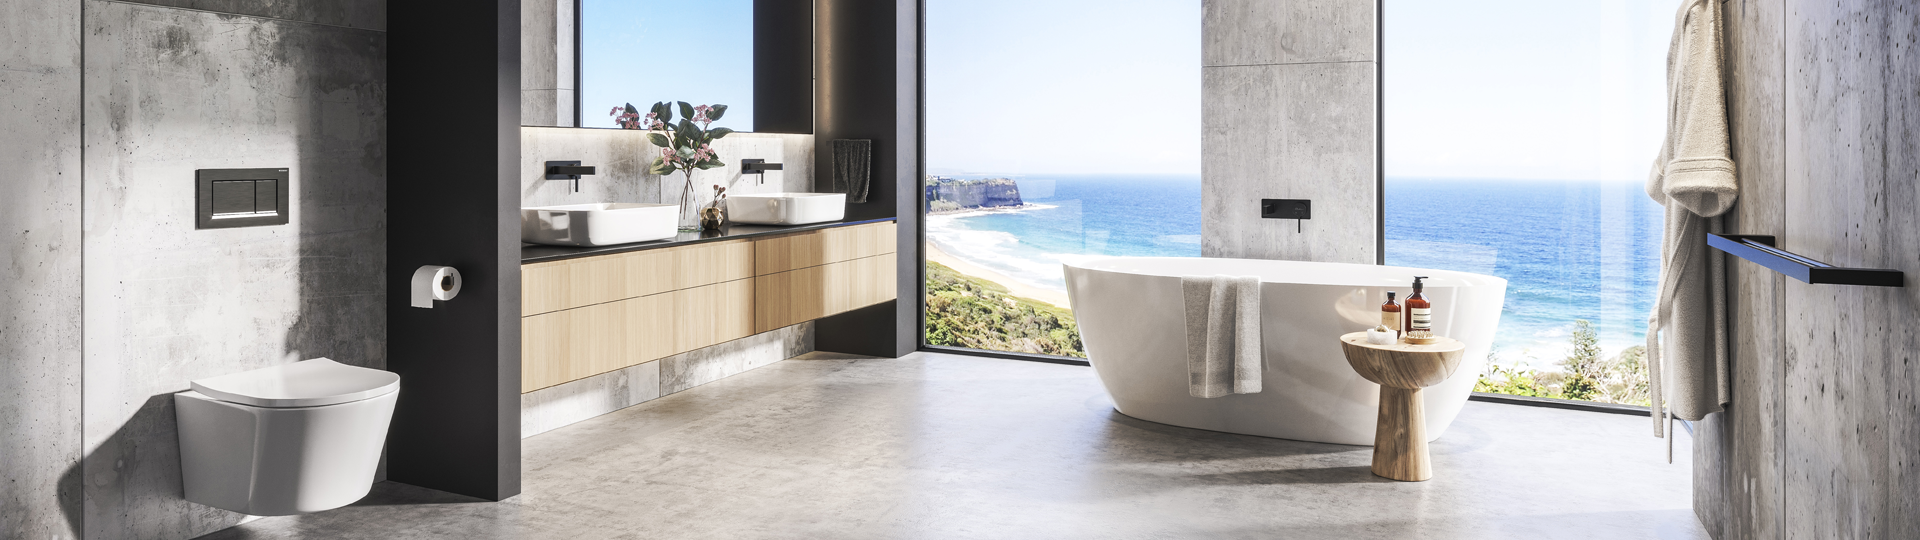 Bathroom with an ocean view, concrete highlights, black tapware and white basins, toilet and freestanding bath